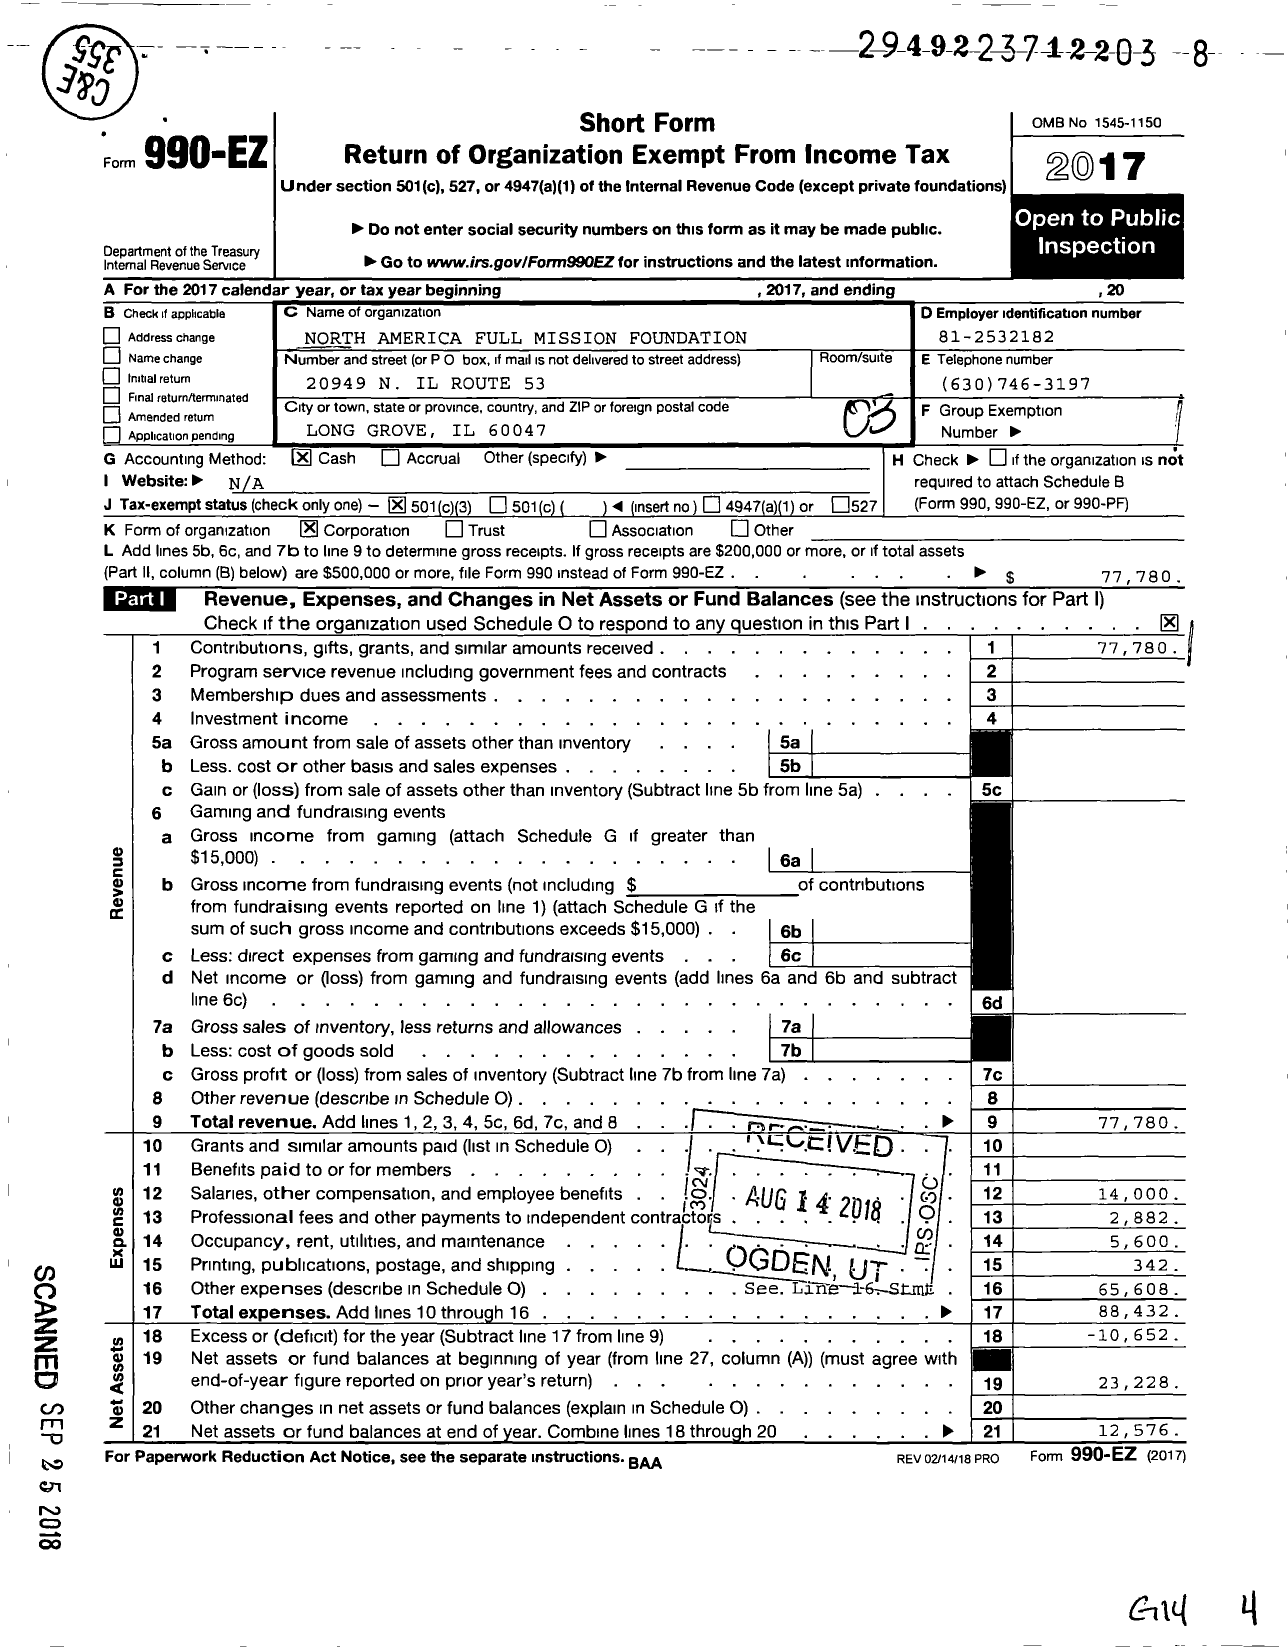 Image of first page of 2017 Form 990EZ for North America Full Mission Foundation